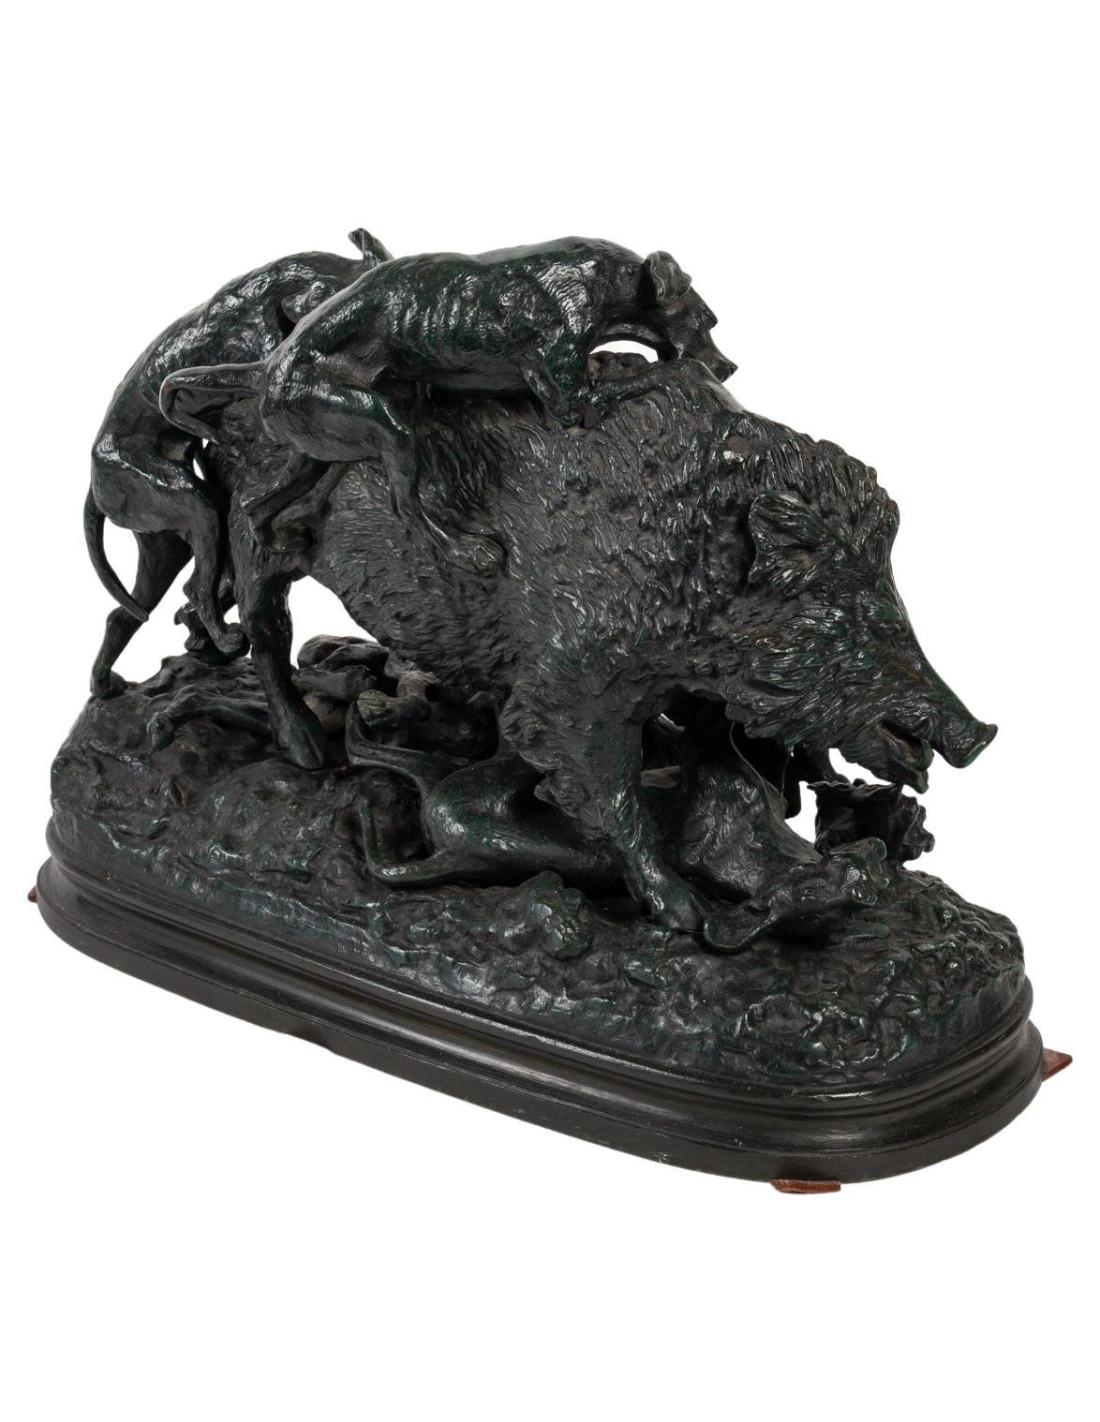 Bronze Sculpture , Hunting Dogs Assaulting the Wild Boar. For Sale 3